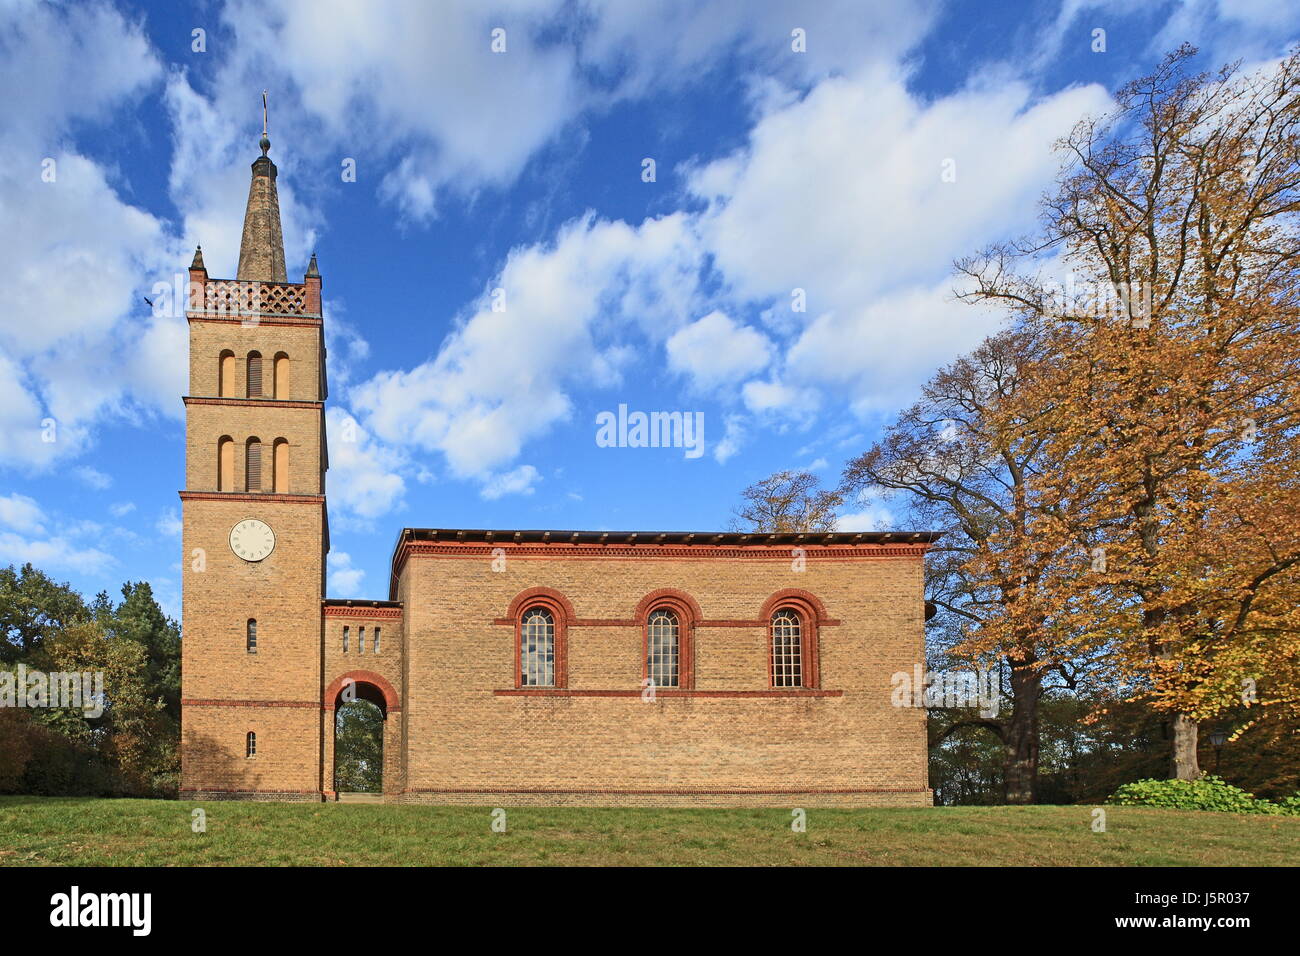 historical church brandenburg worth seeing outing nave steeple building Stock Photo